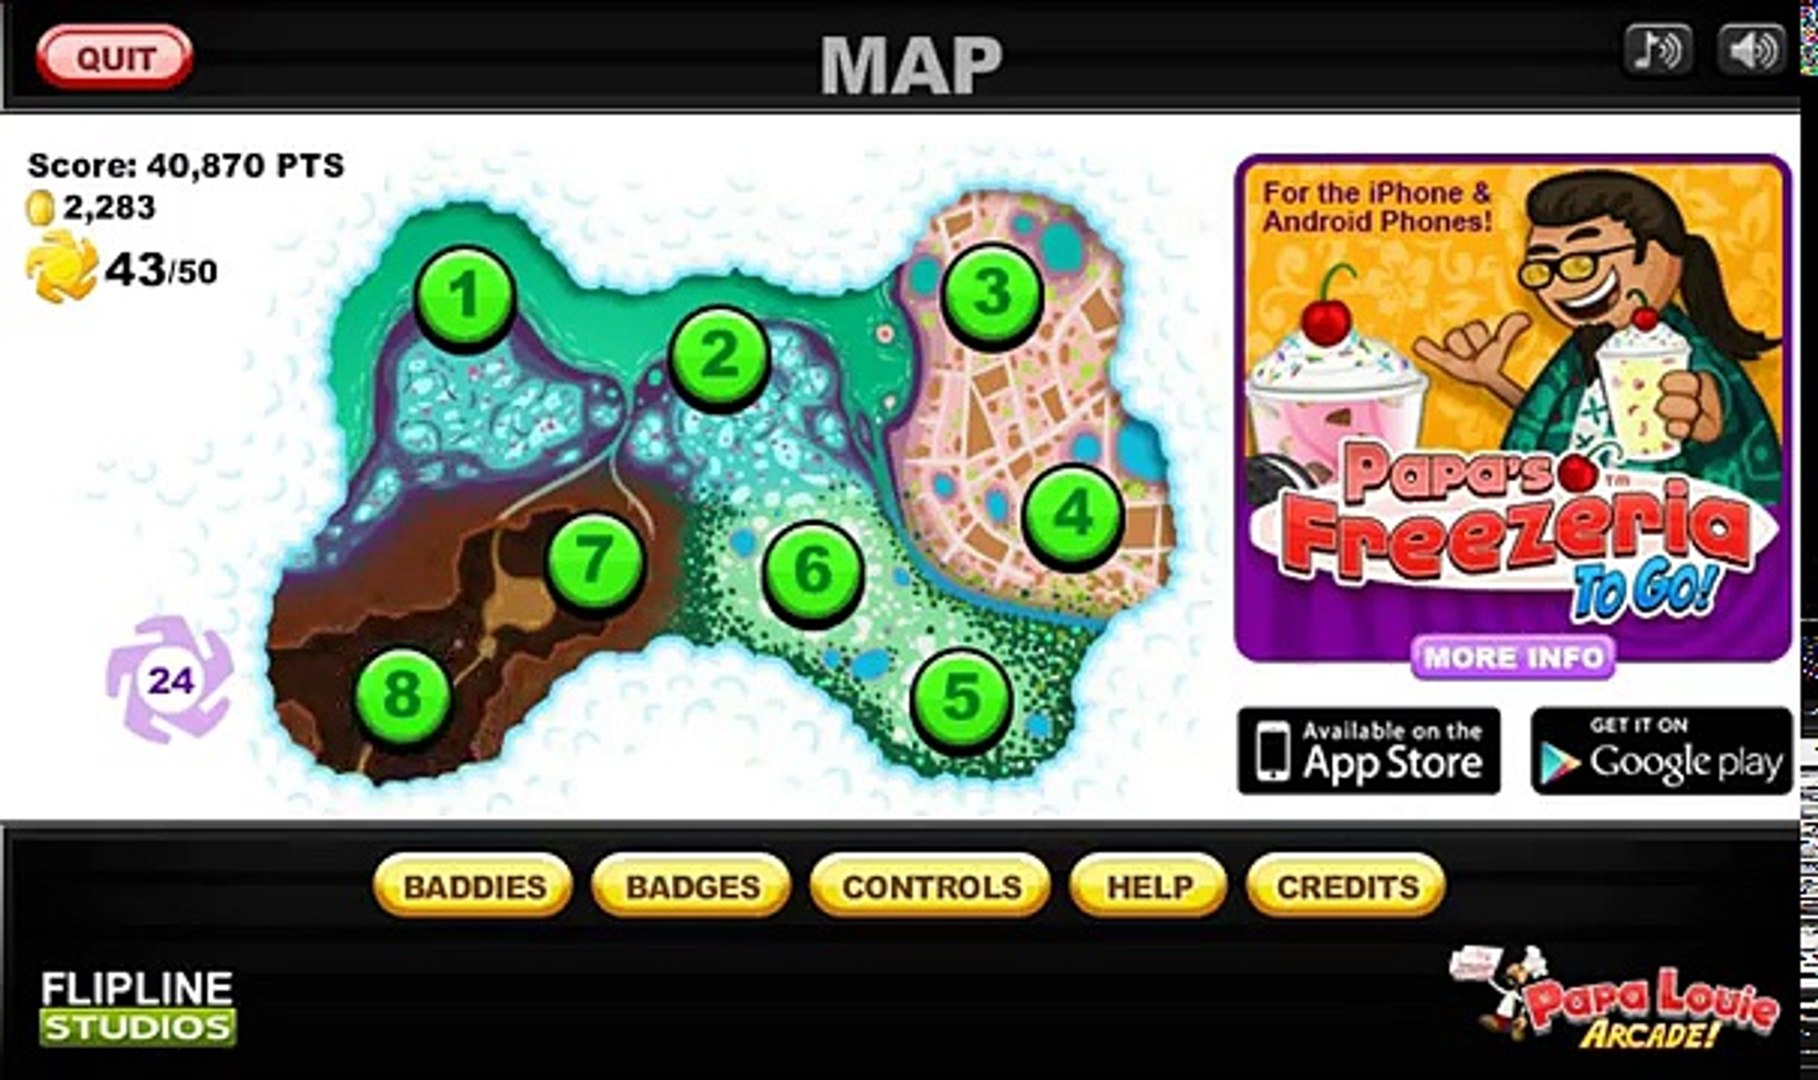 Play Papa Louie 3 When Sundaes Attack!